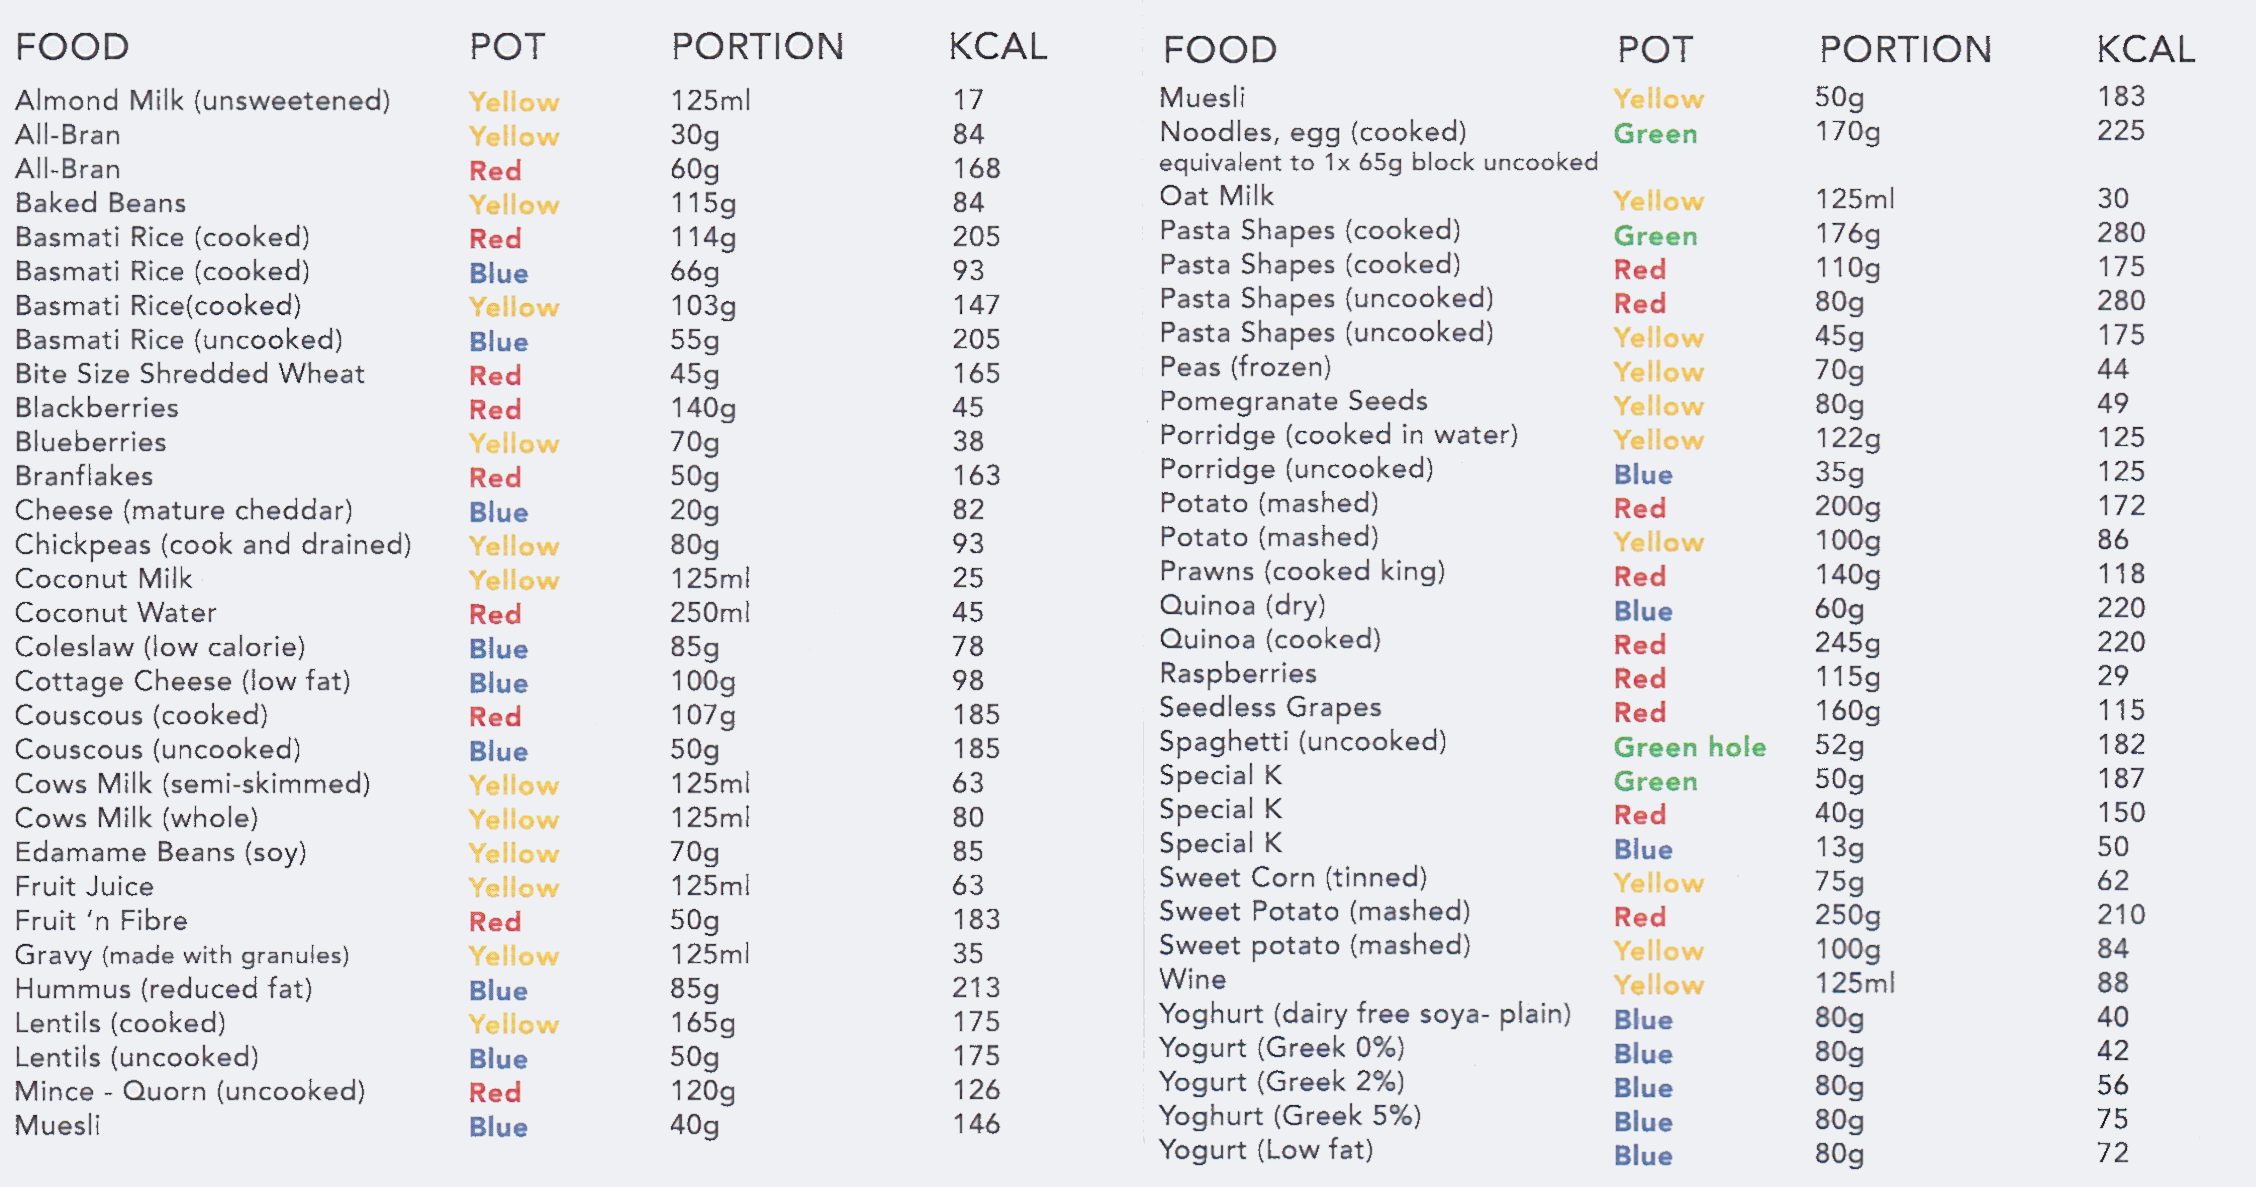 List of Portion Pot Portion sizes and calories